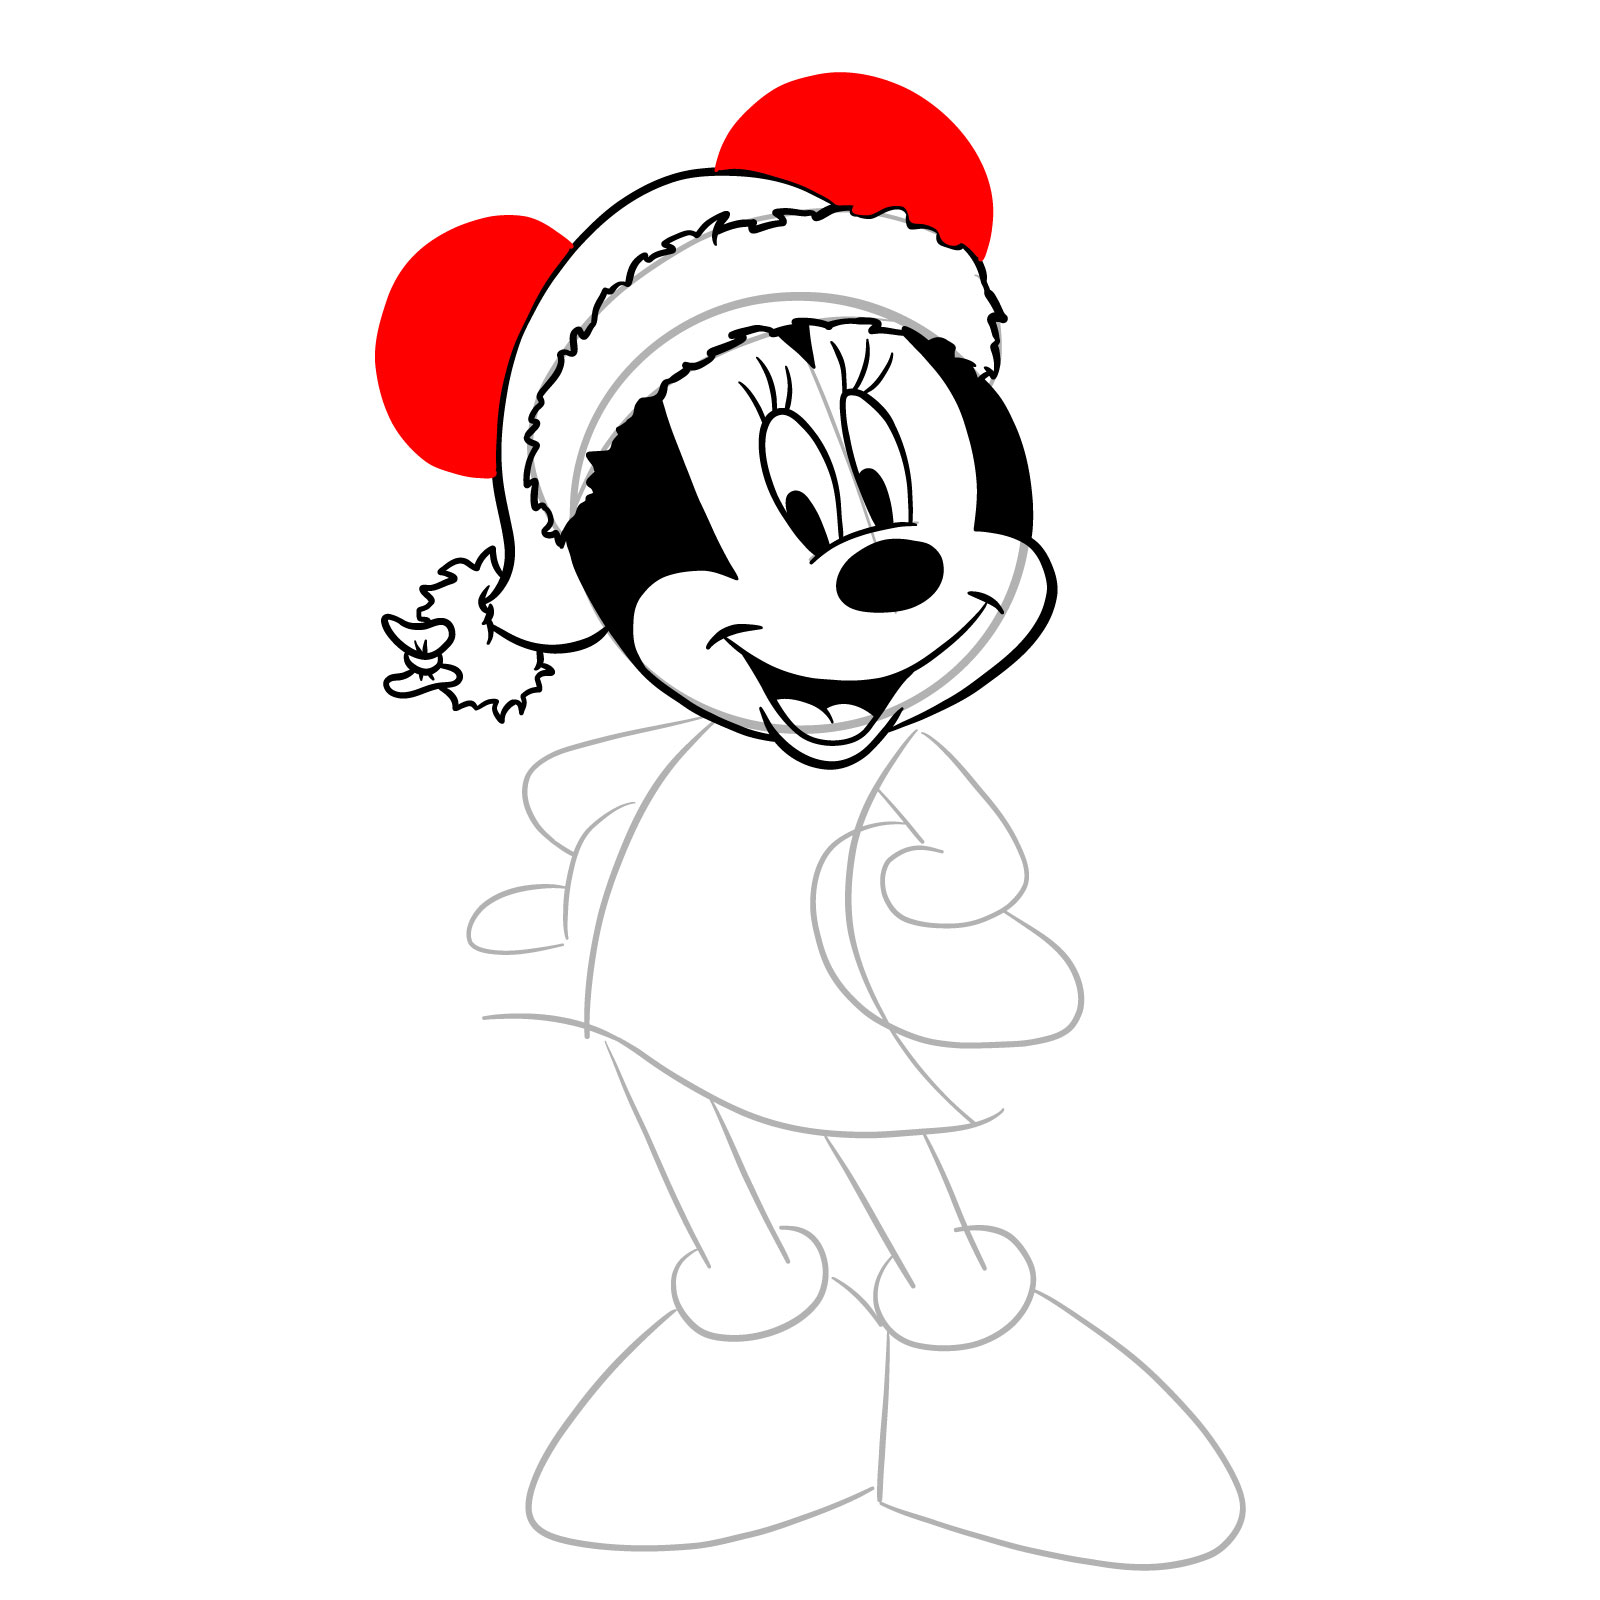 How to draw Minnie in a Christmas dress - step 17